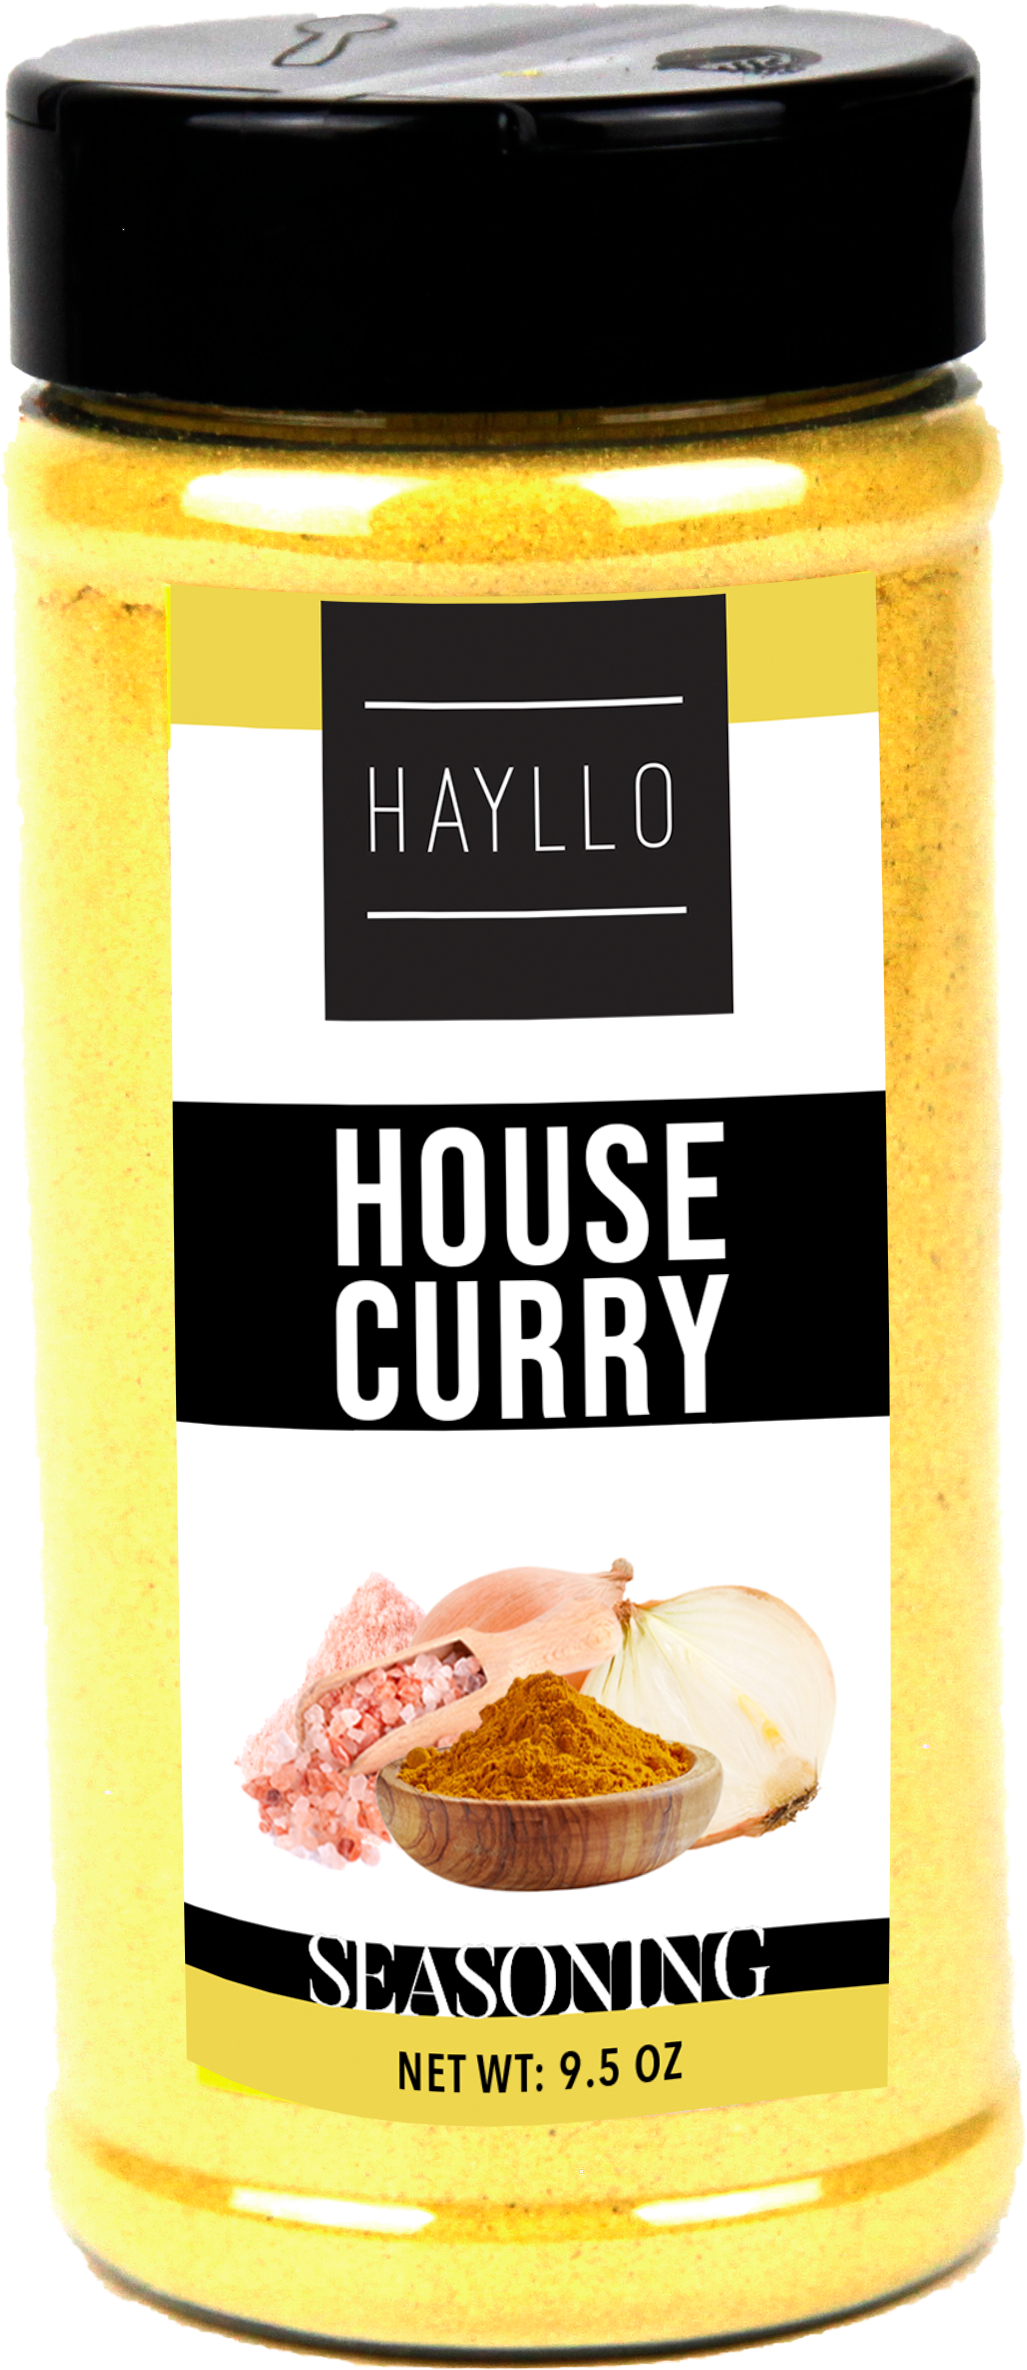 House Curry